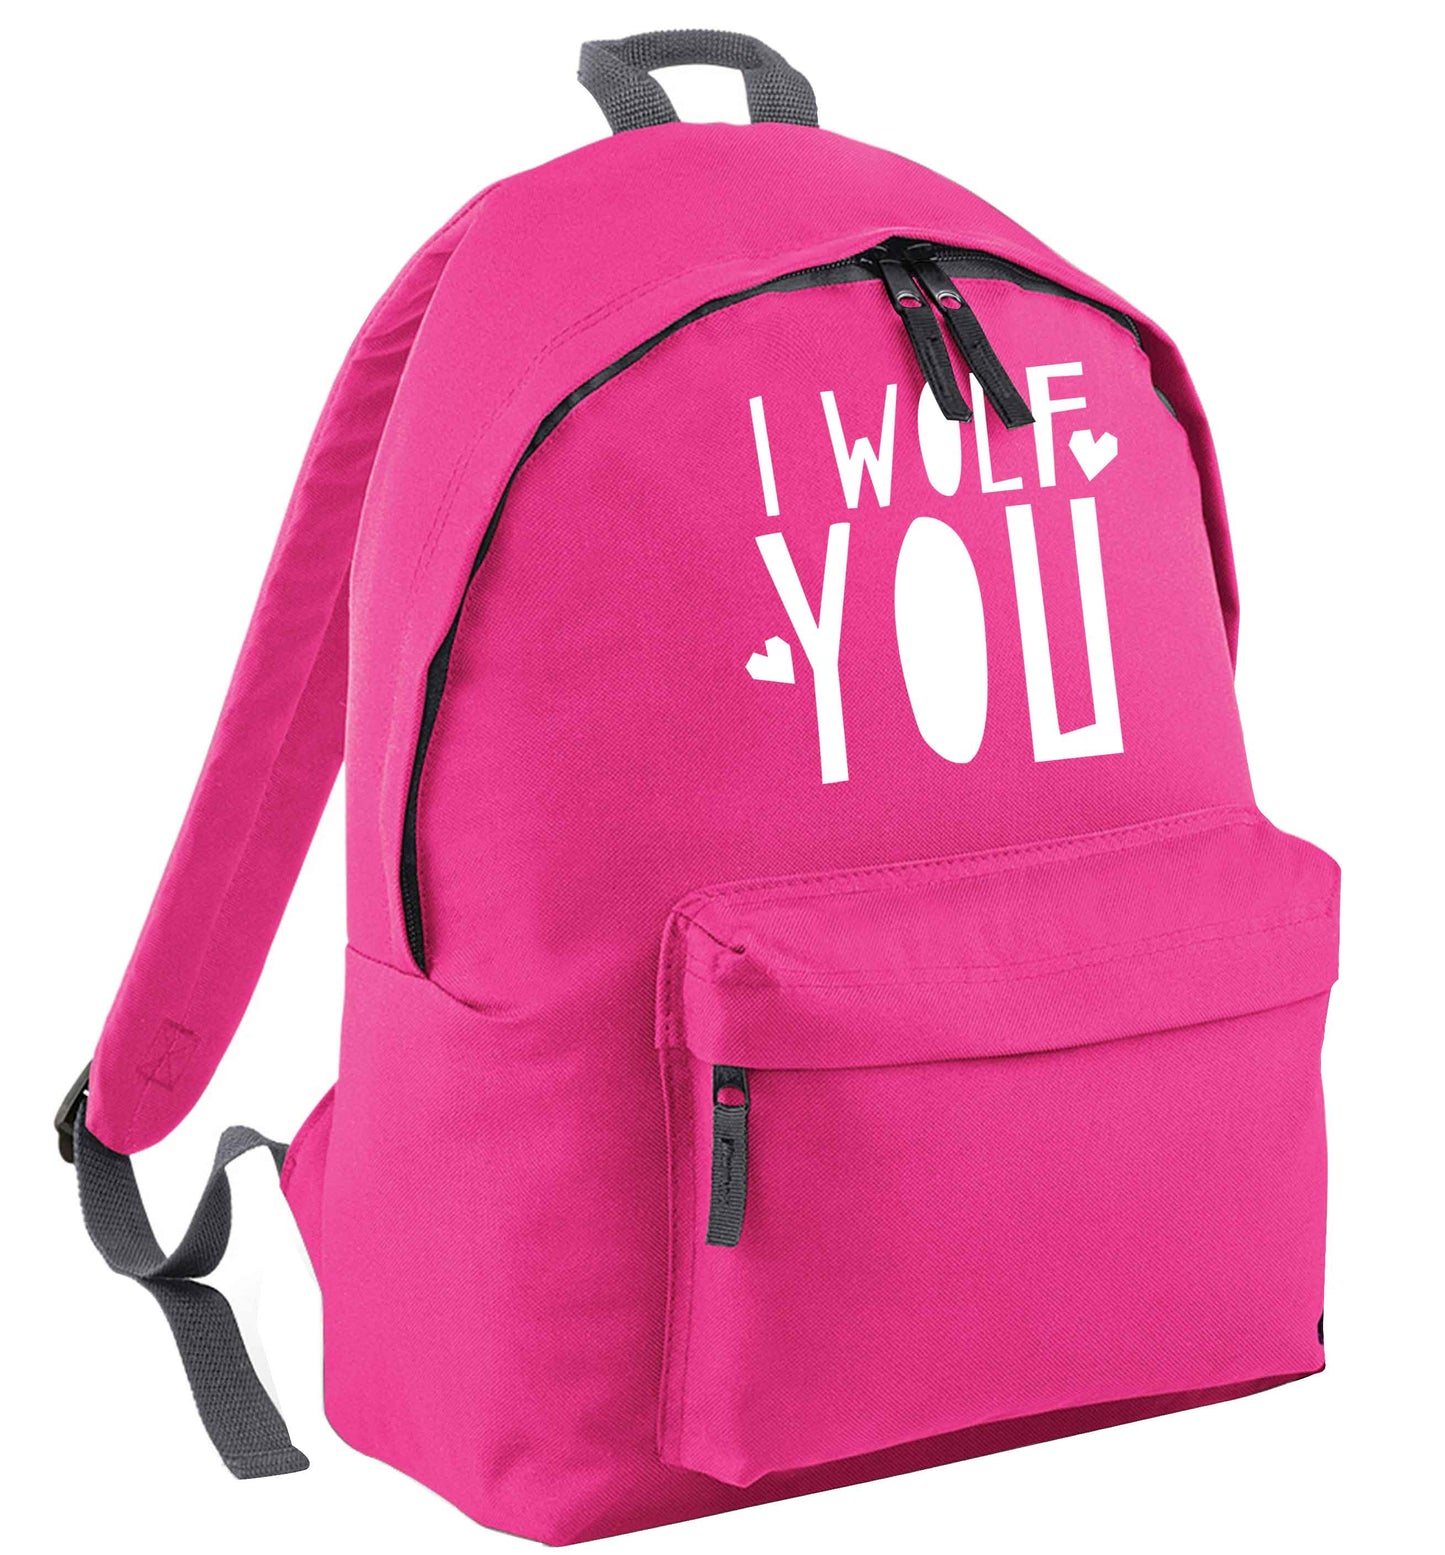 I wolf you | Children's backpack